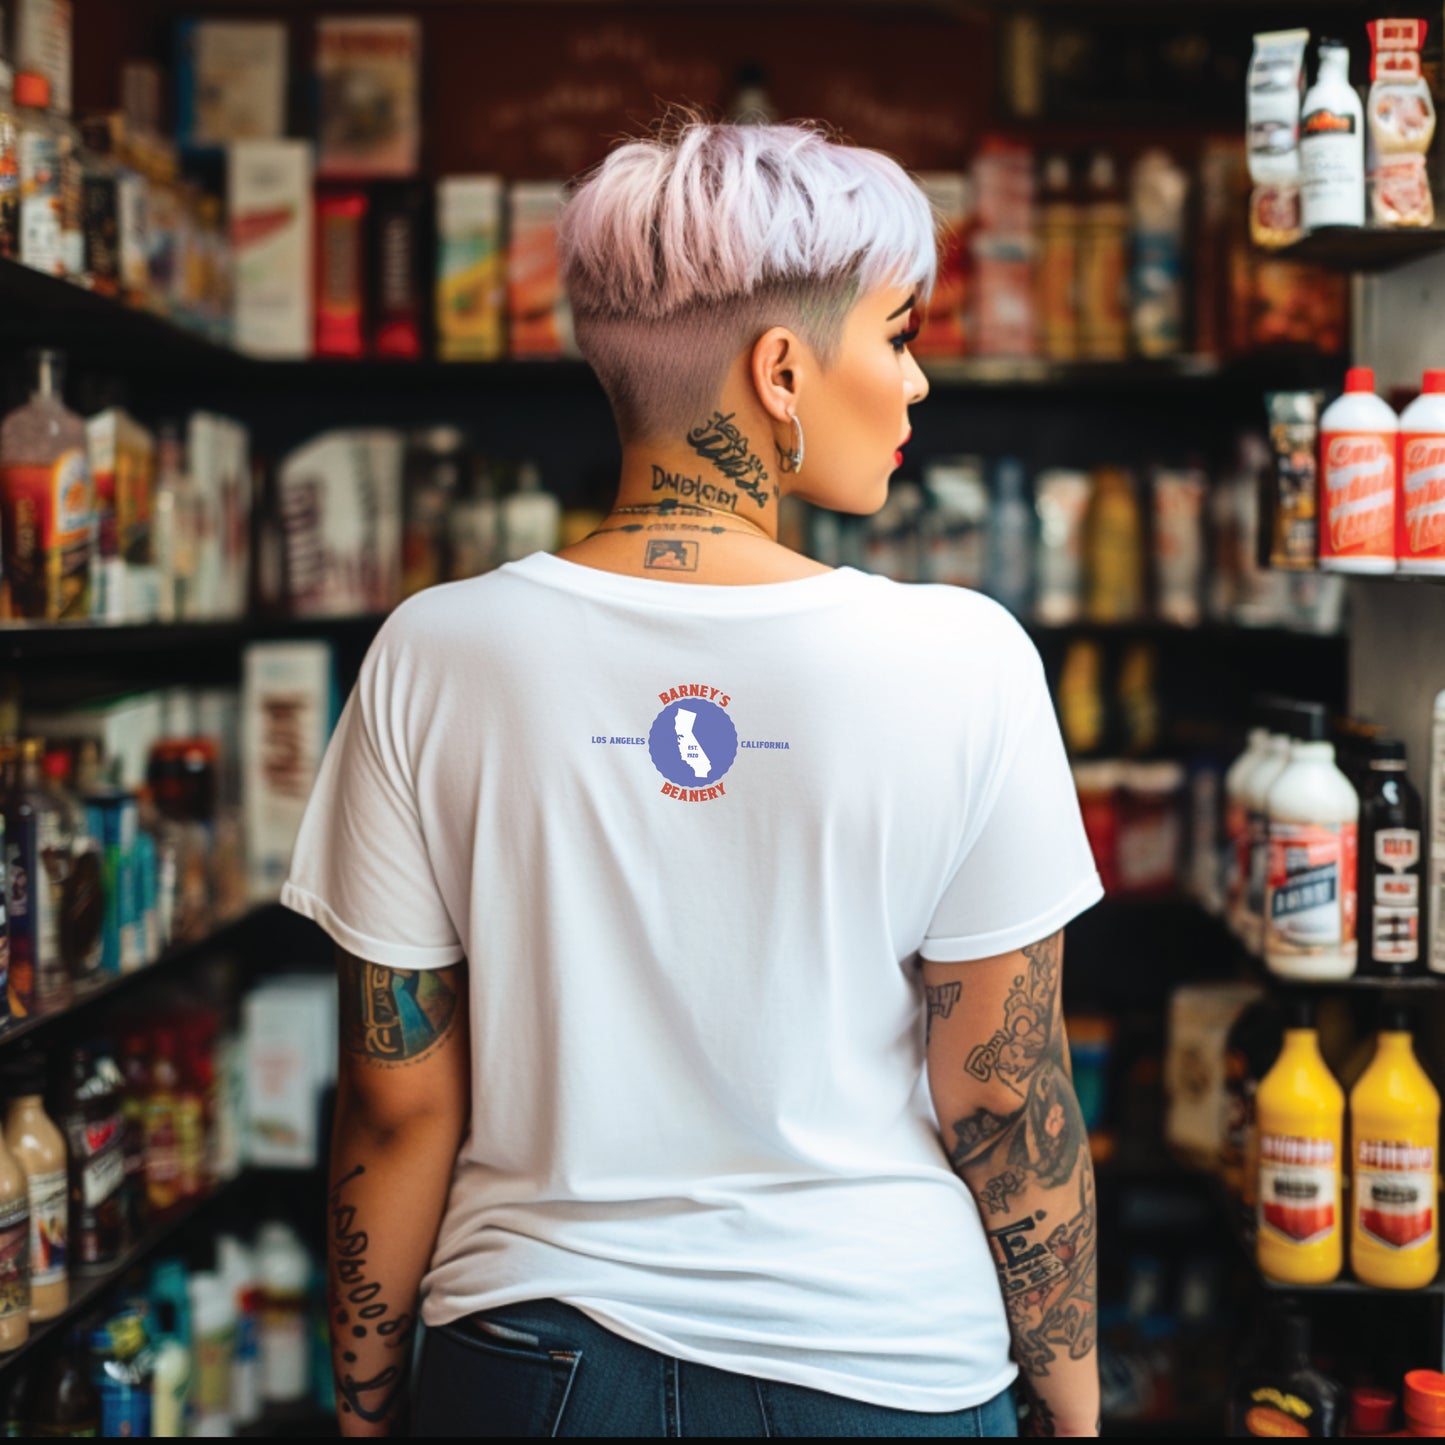 Eat More Chili. Drink More Beer. | BARNEY'S BEANERY - Women's Retro Graphic Tee | White Bella+Canvas 3001 T-Shirt - Red & Blue Badge Graphic On Back View Of Female Lifestyle Image